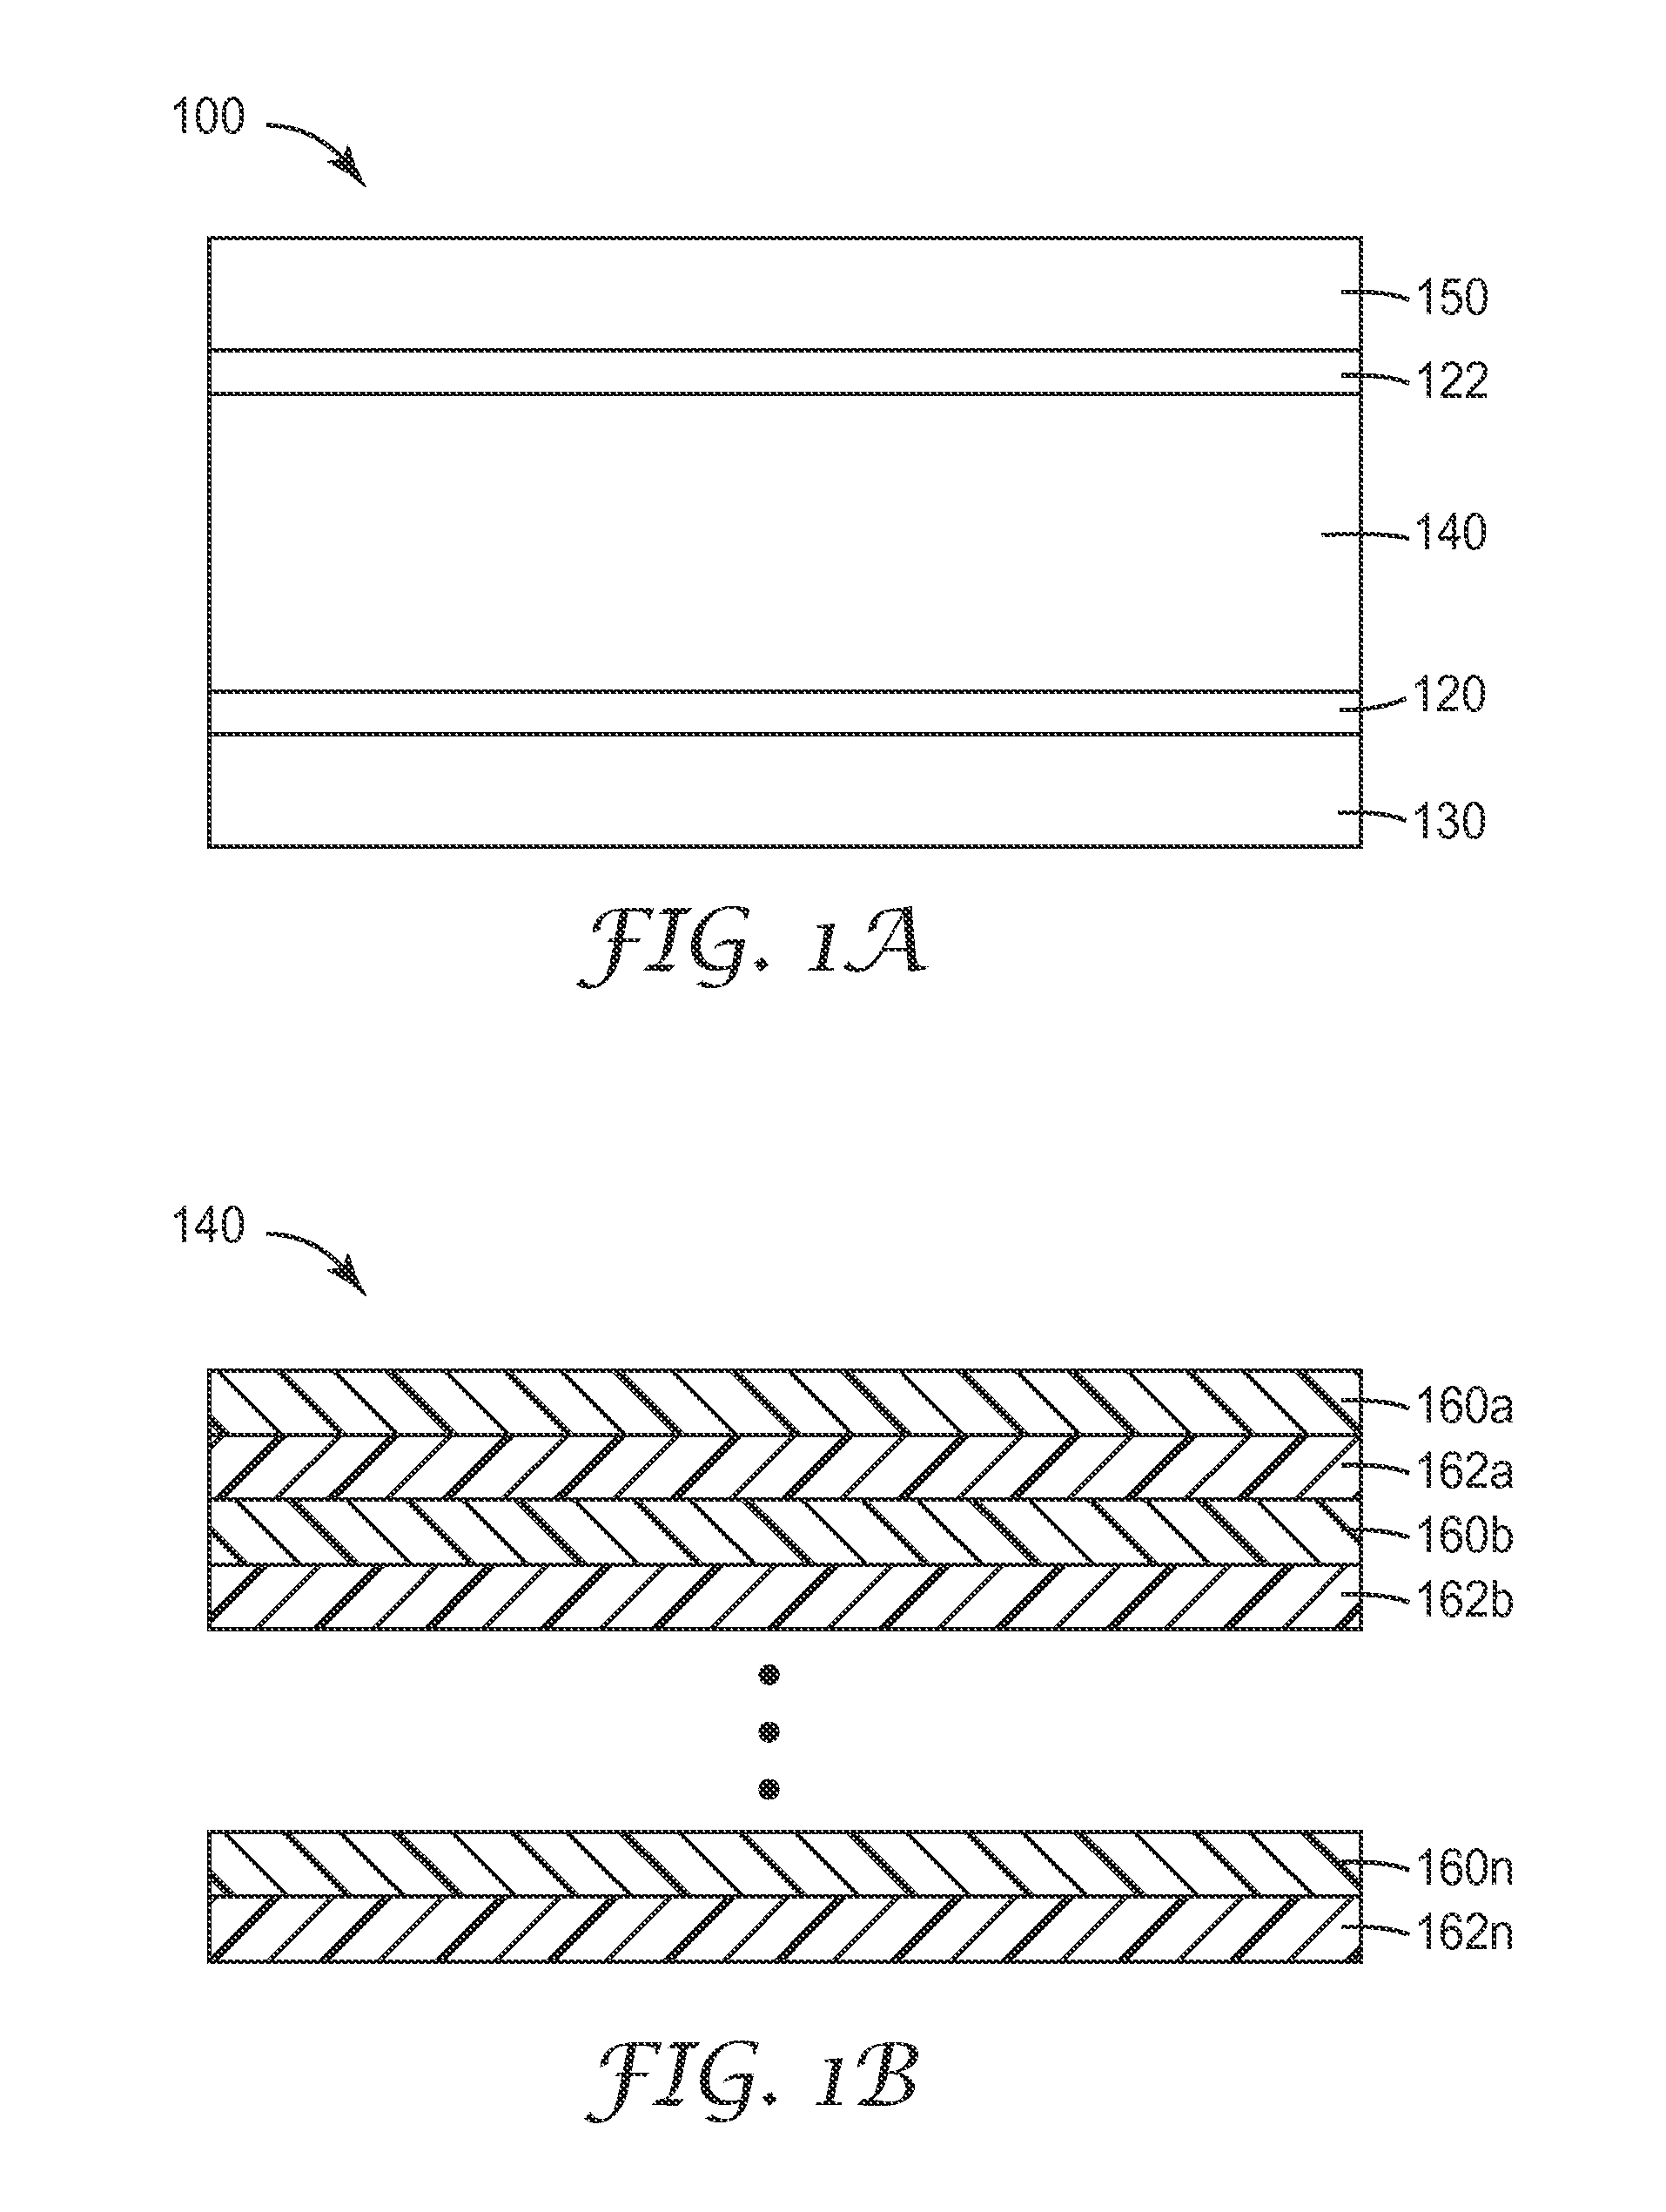 Architectural articles comprising a fluoropolymeric multilayer optical film and methods of making the same